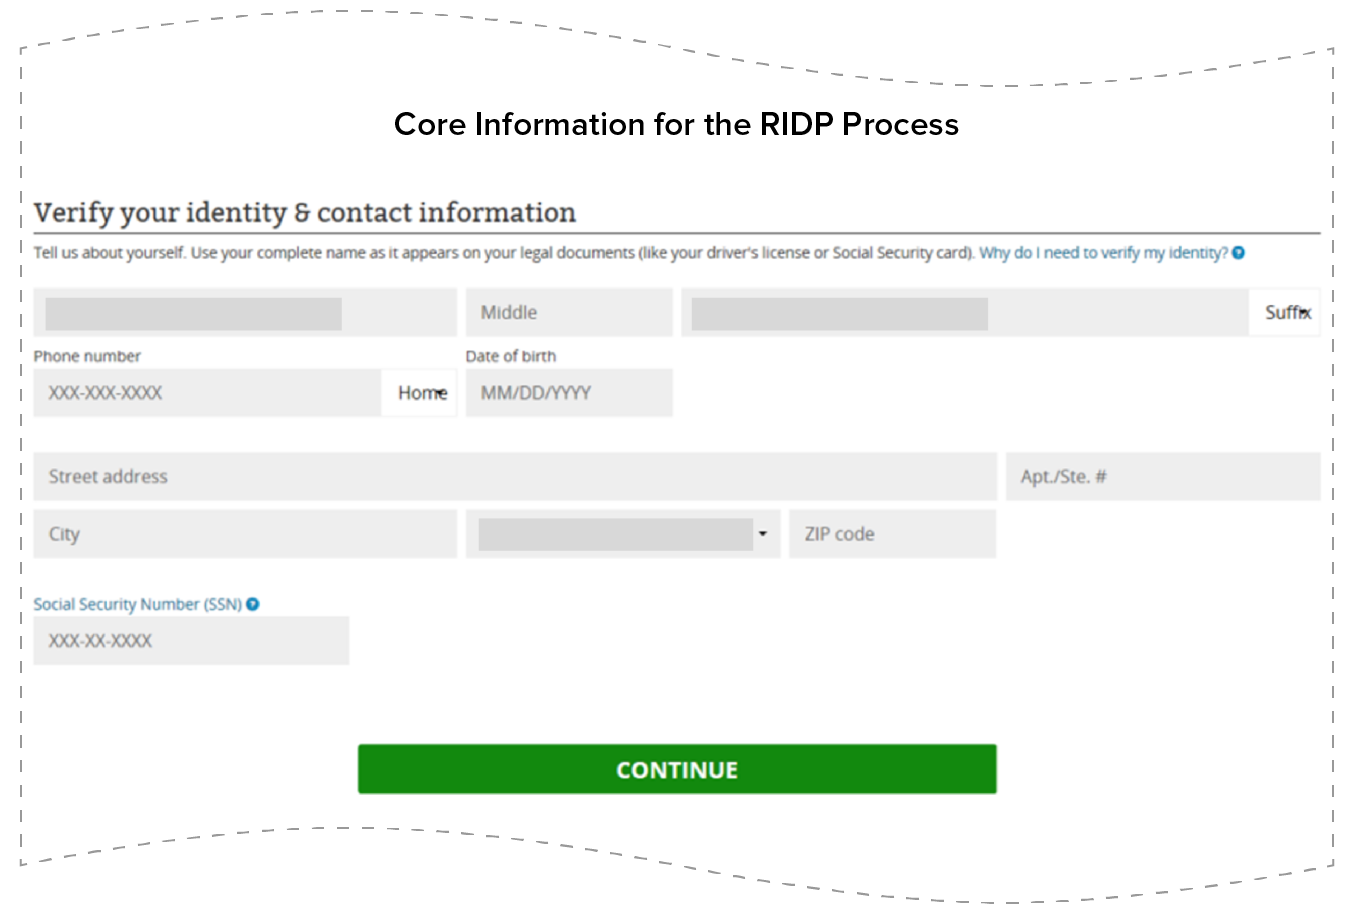 Core Information for the RIDP Process